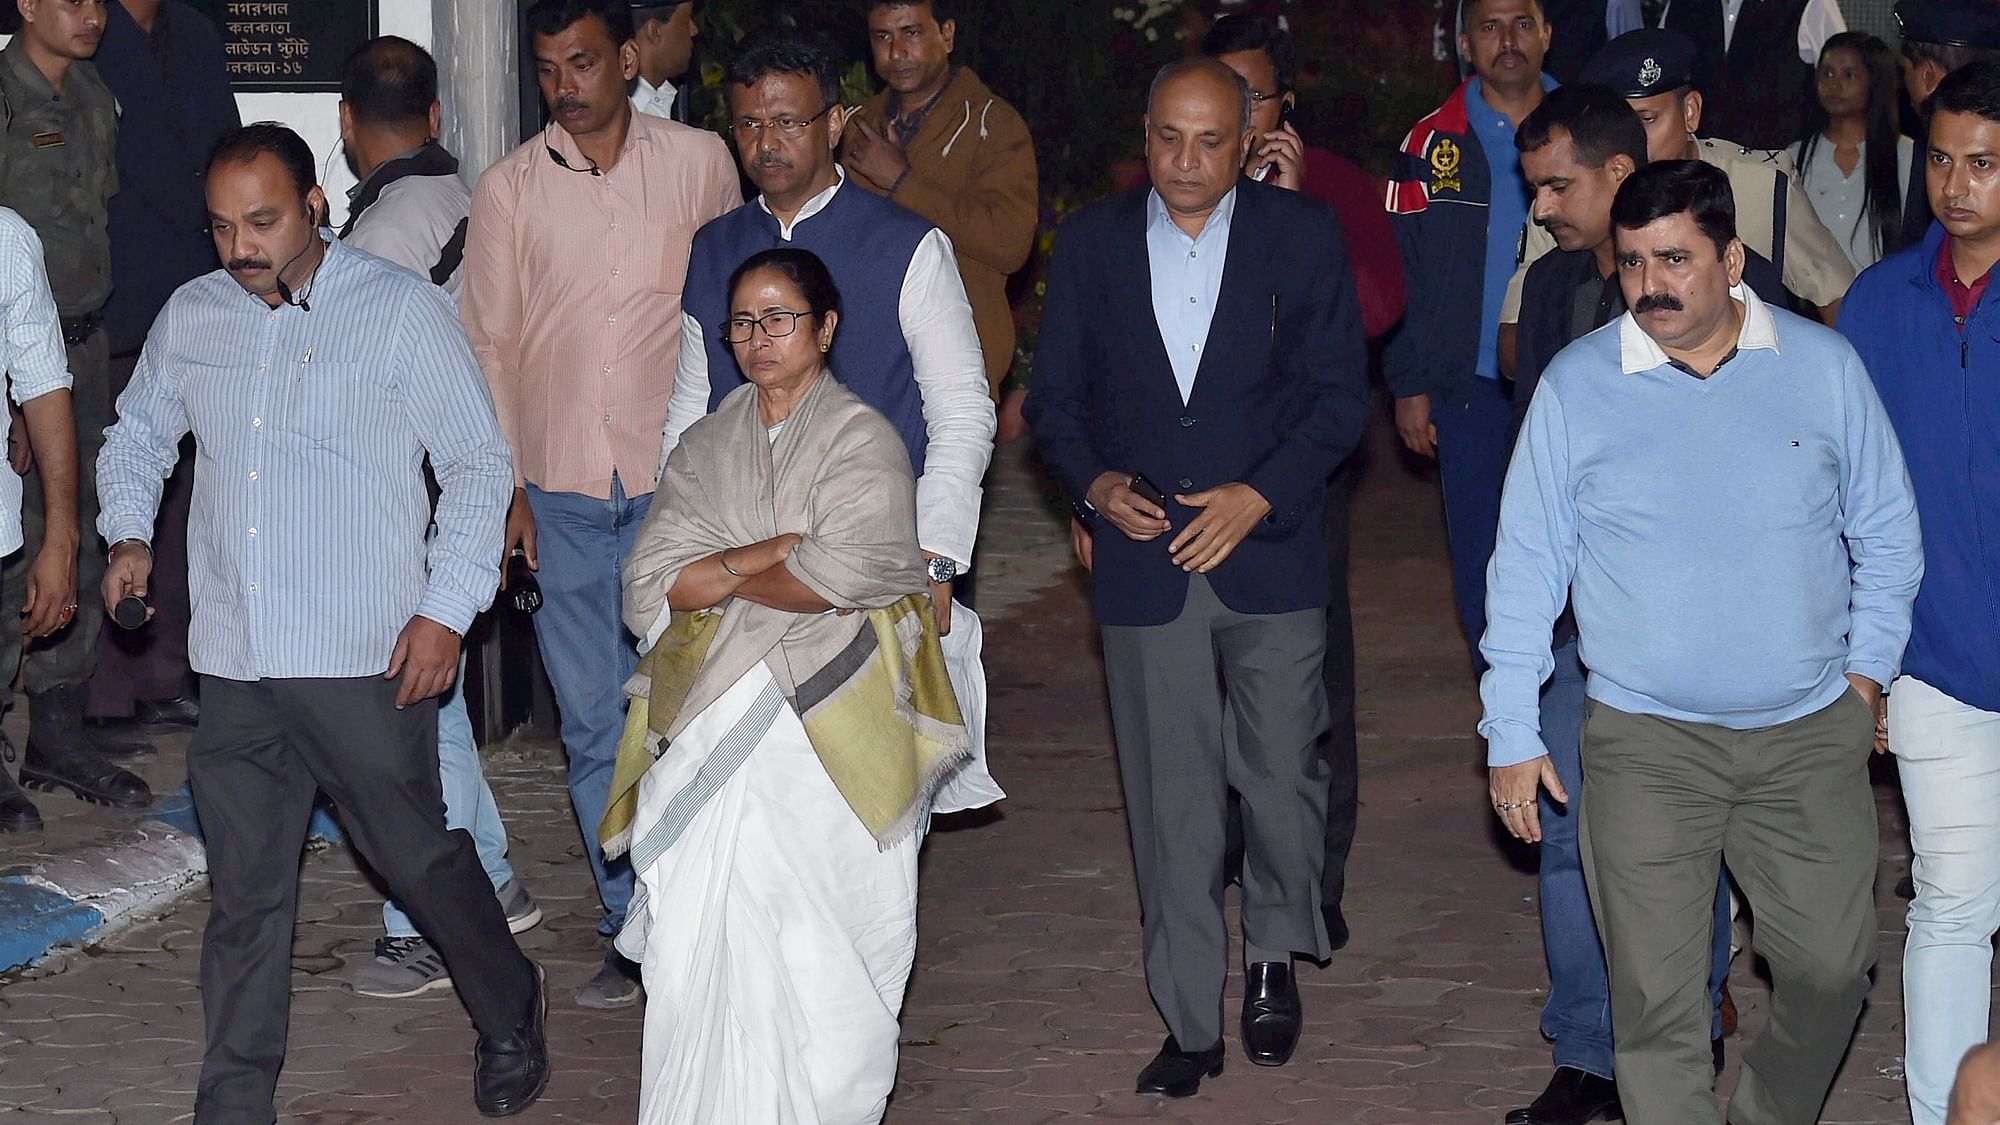 Mamata Banerjee, one of the prime movers behind the effort to cobble together an anti-BJP alliance ahead of the Lok Sabha polls, claimed the CBI knocked on the doors of Rajeev Kumar without a search warrant.